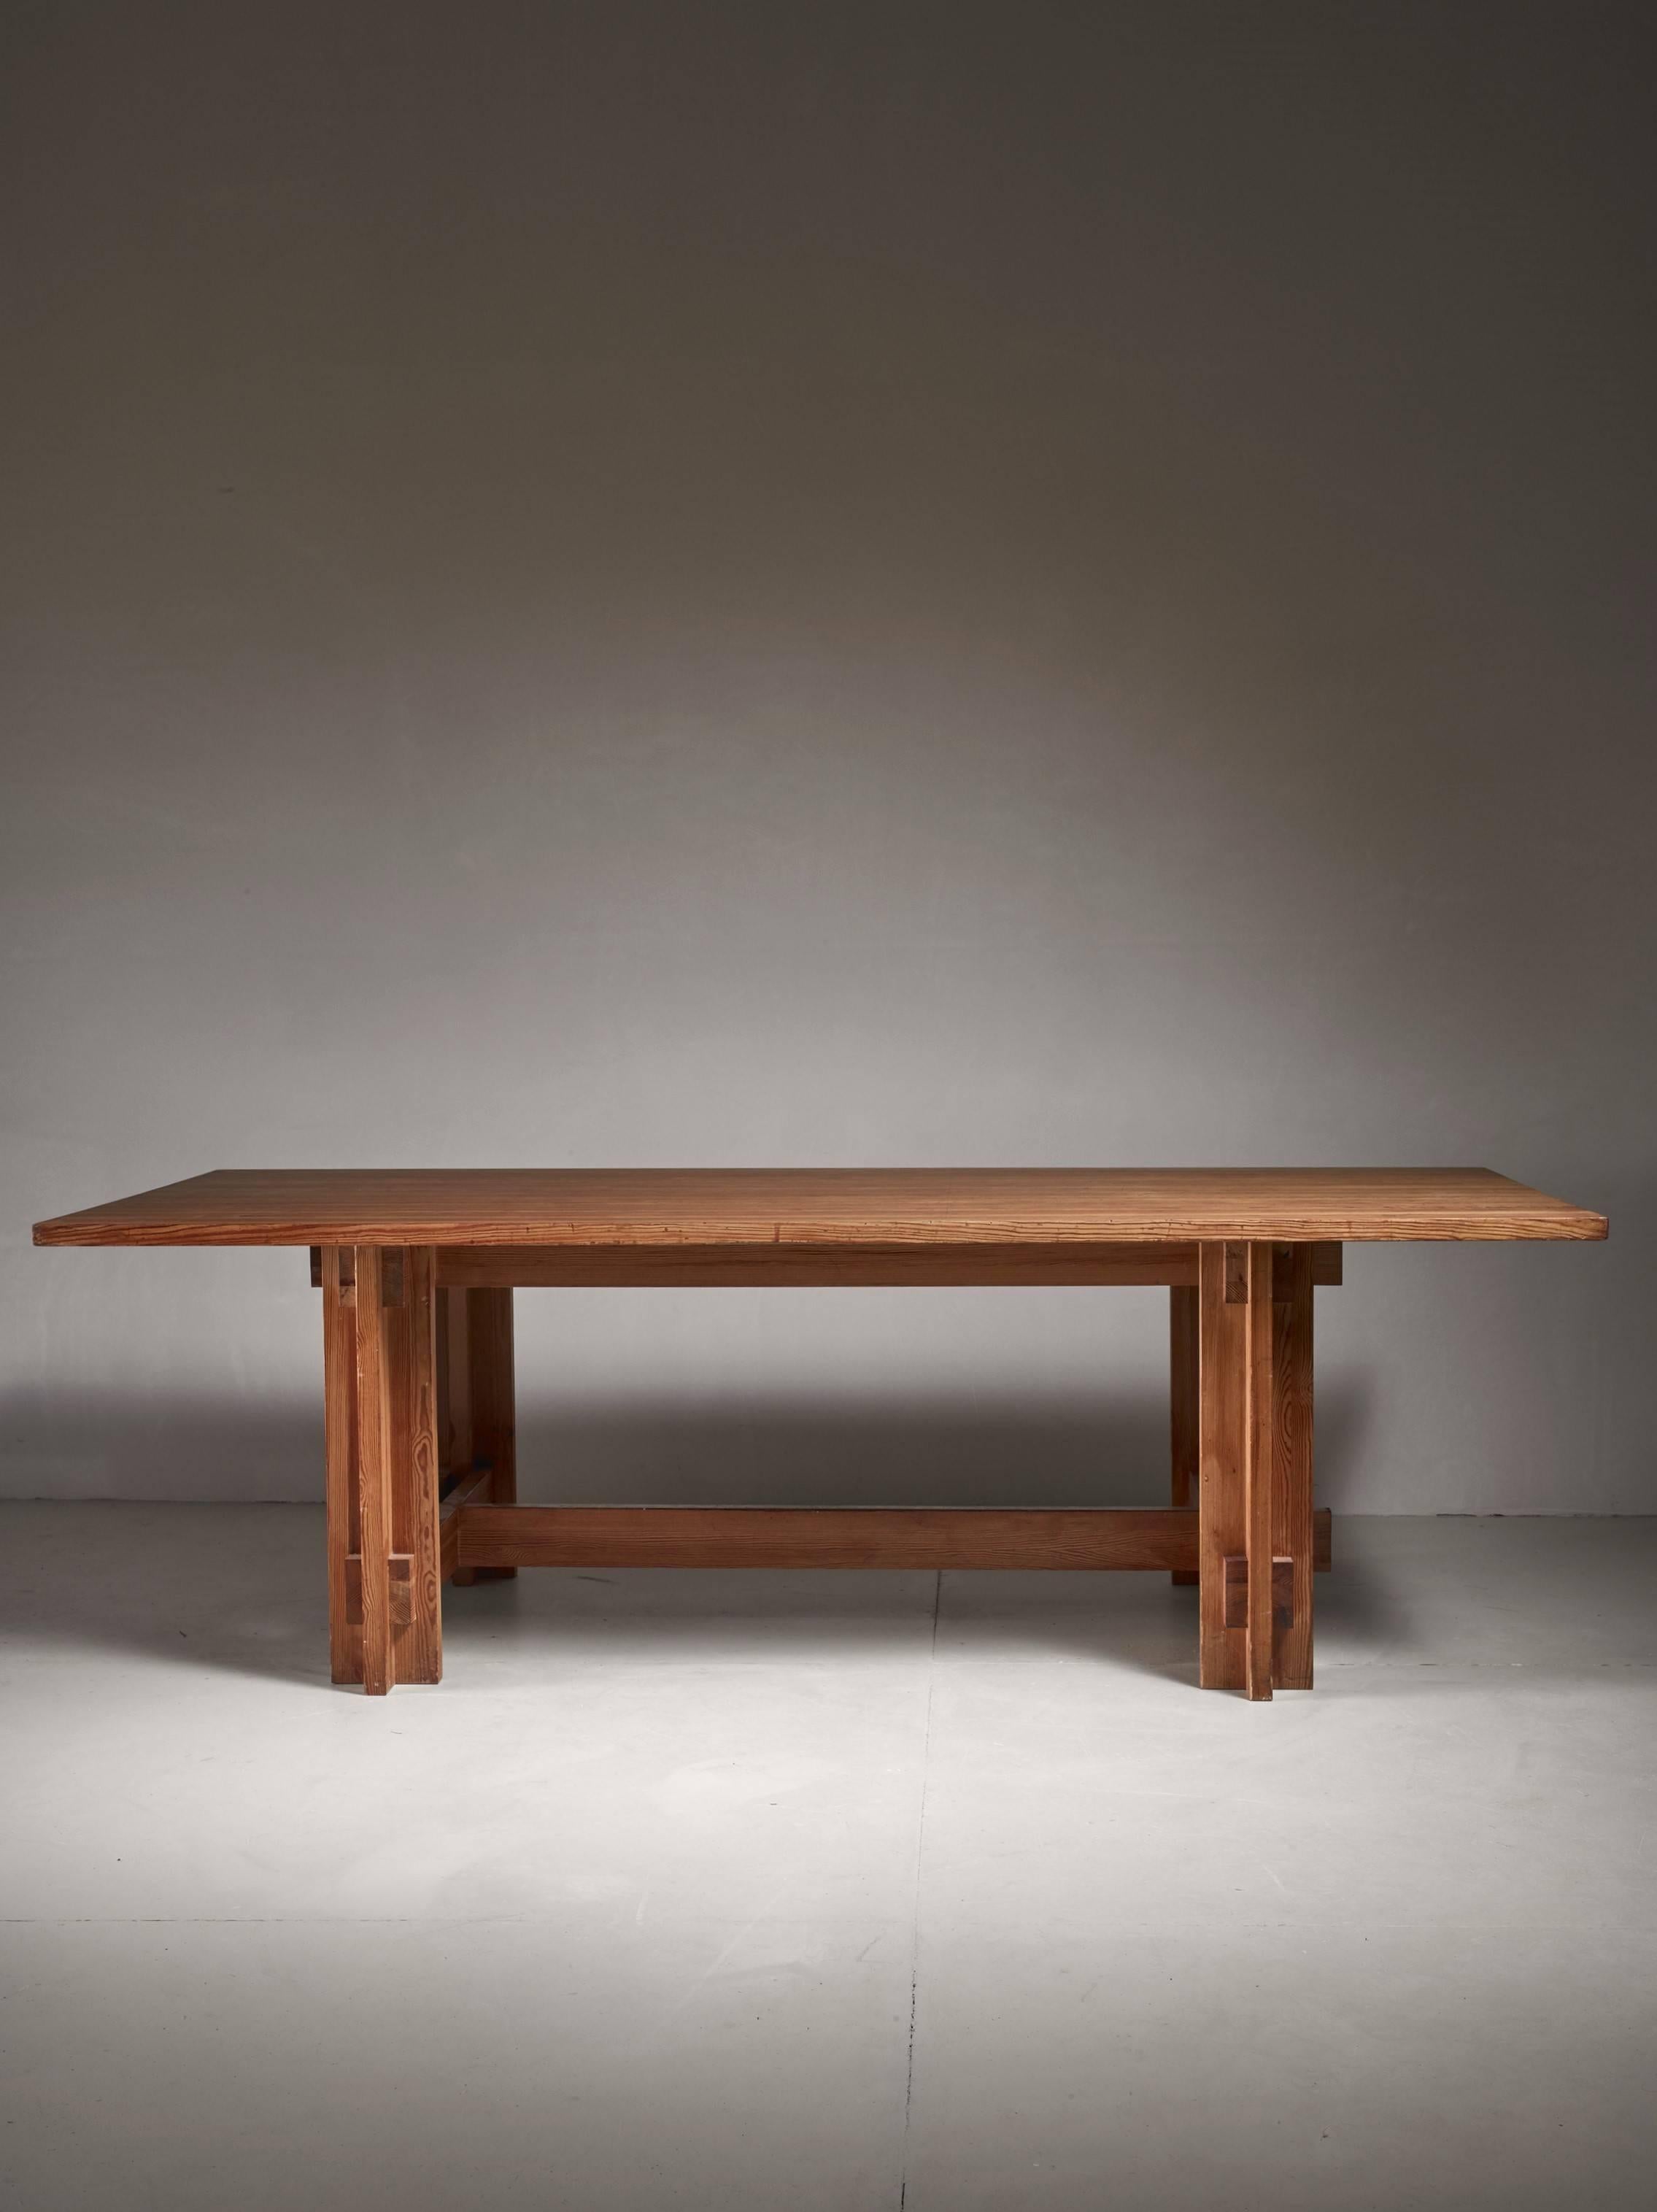 Organic Modern Peter Schmid Architectural Pine Dining Table, Austria, 1960s For Sale